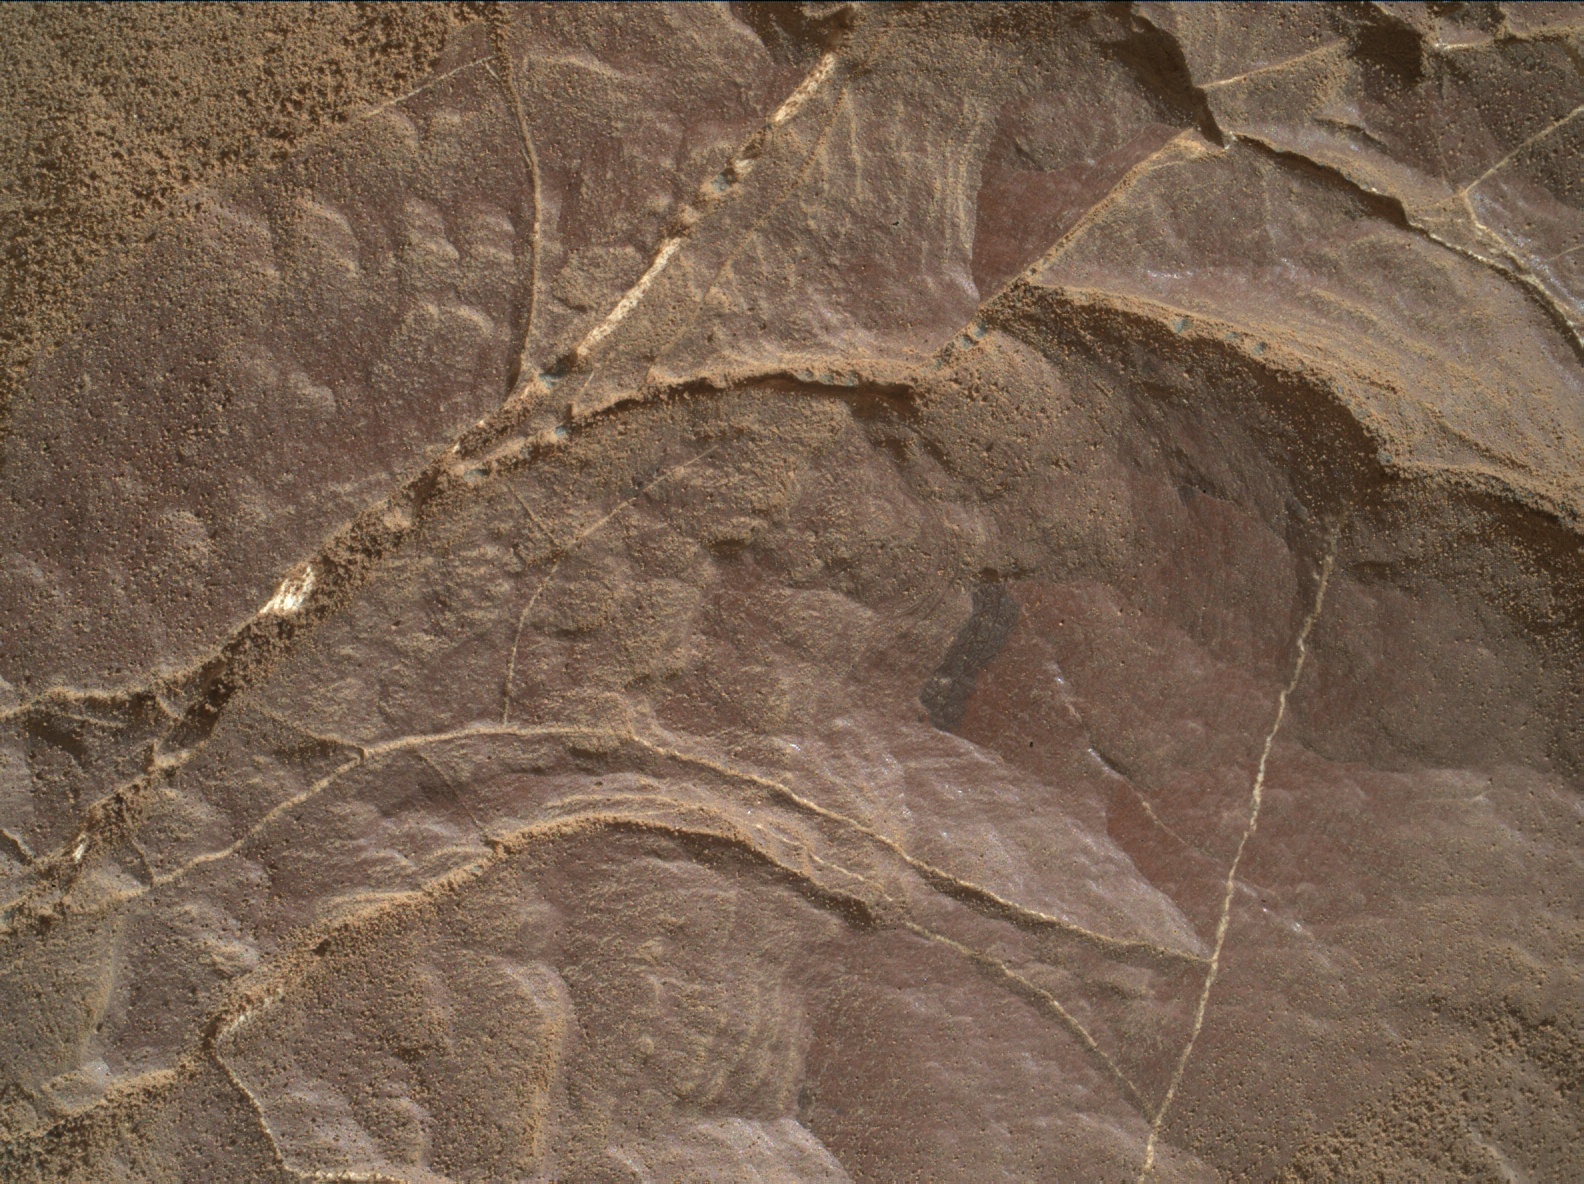 Nasa's Mars rover Curiosity acquired this image using its Mars Hand Lens Imager (MAHLI) on Sol 2008